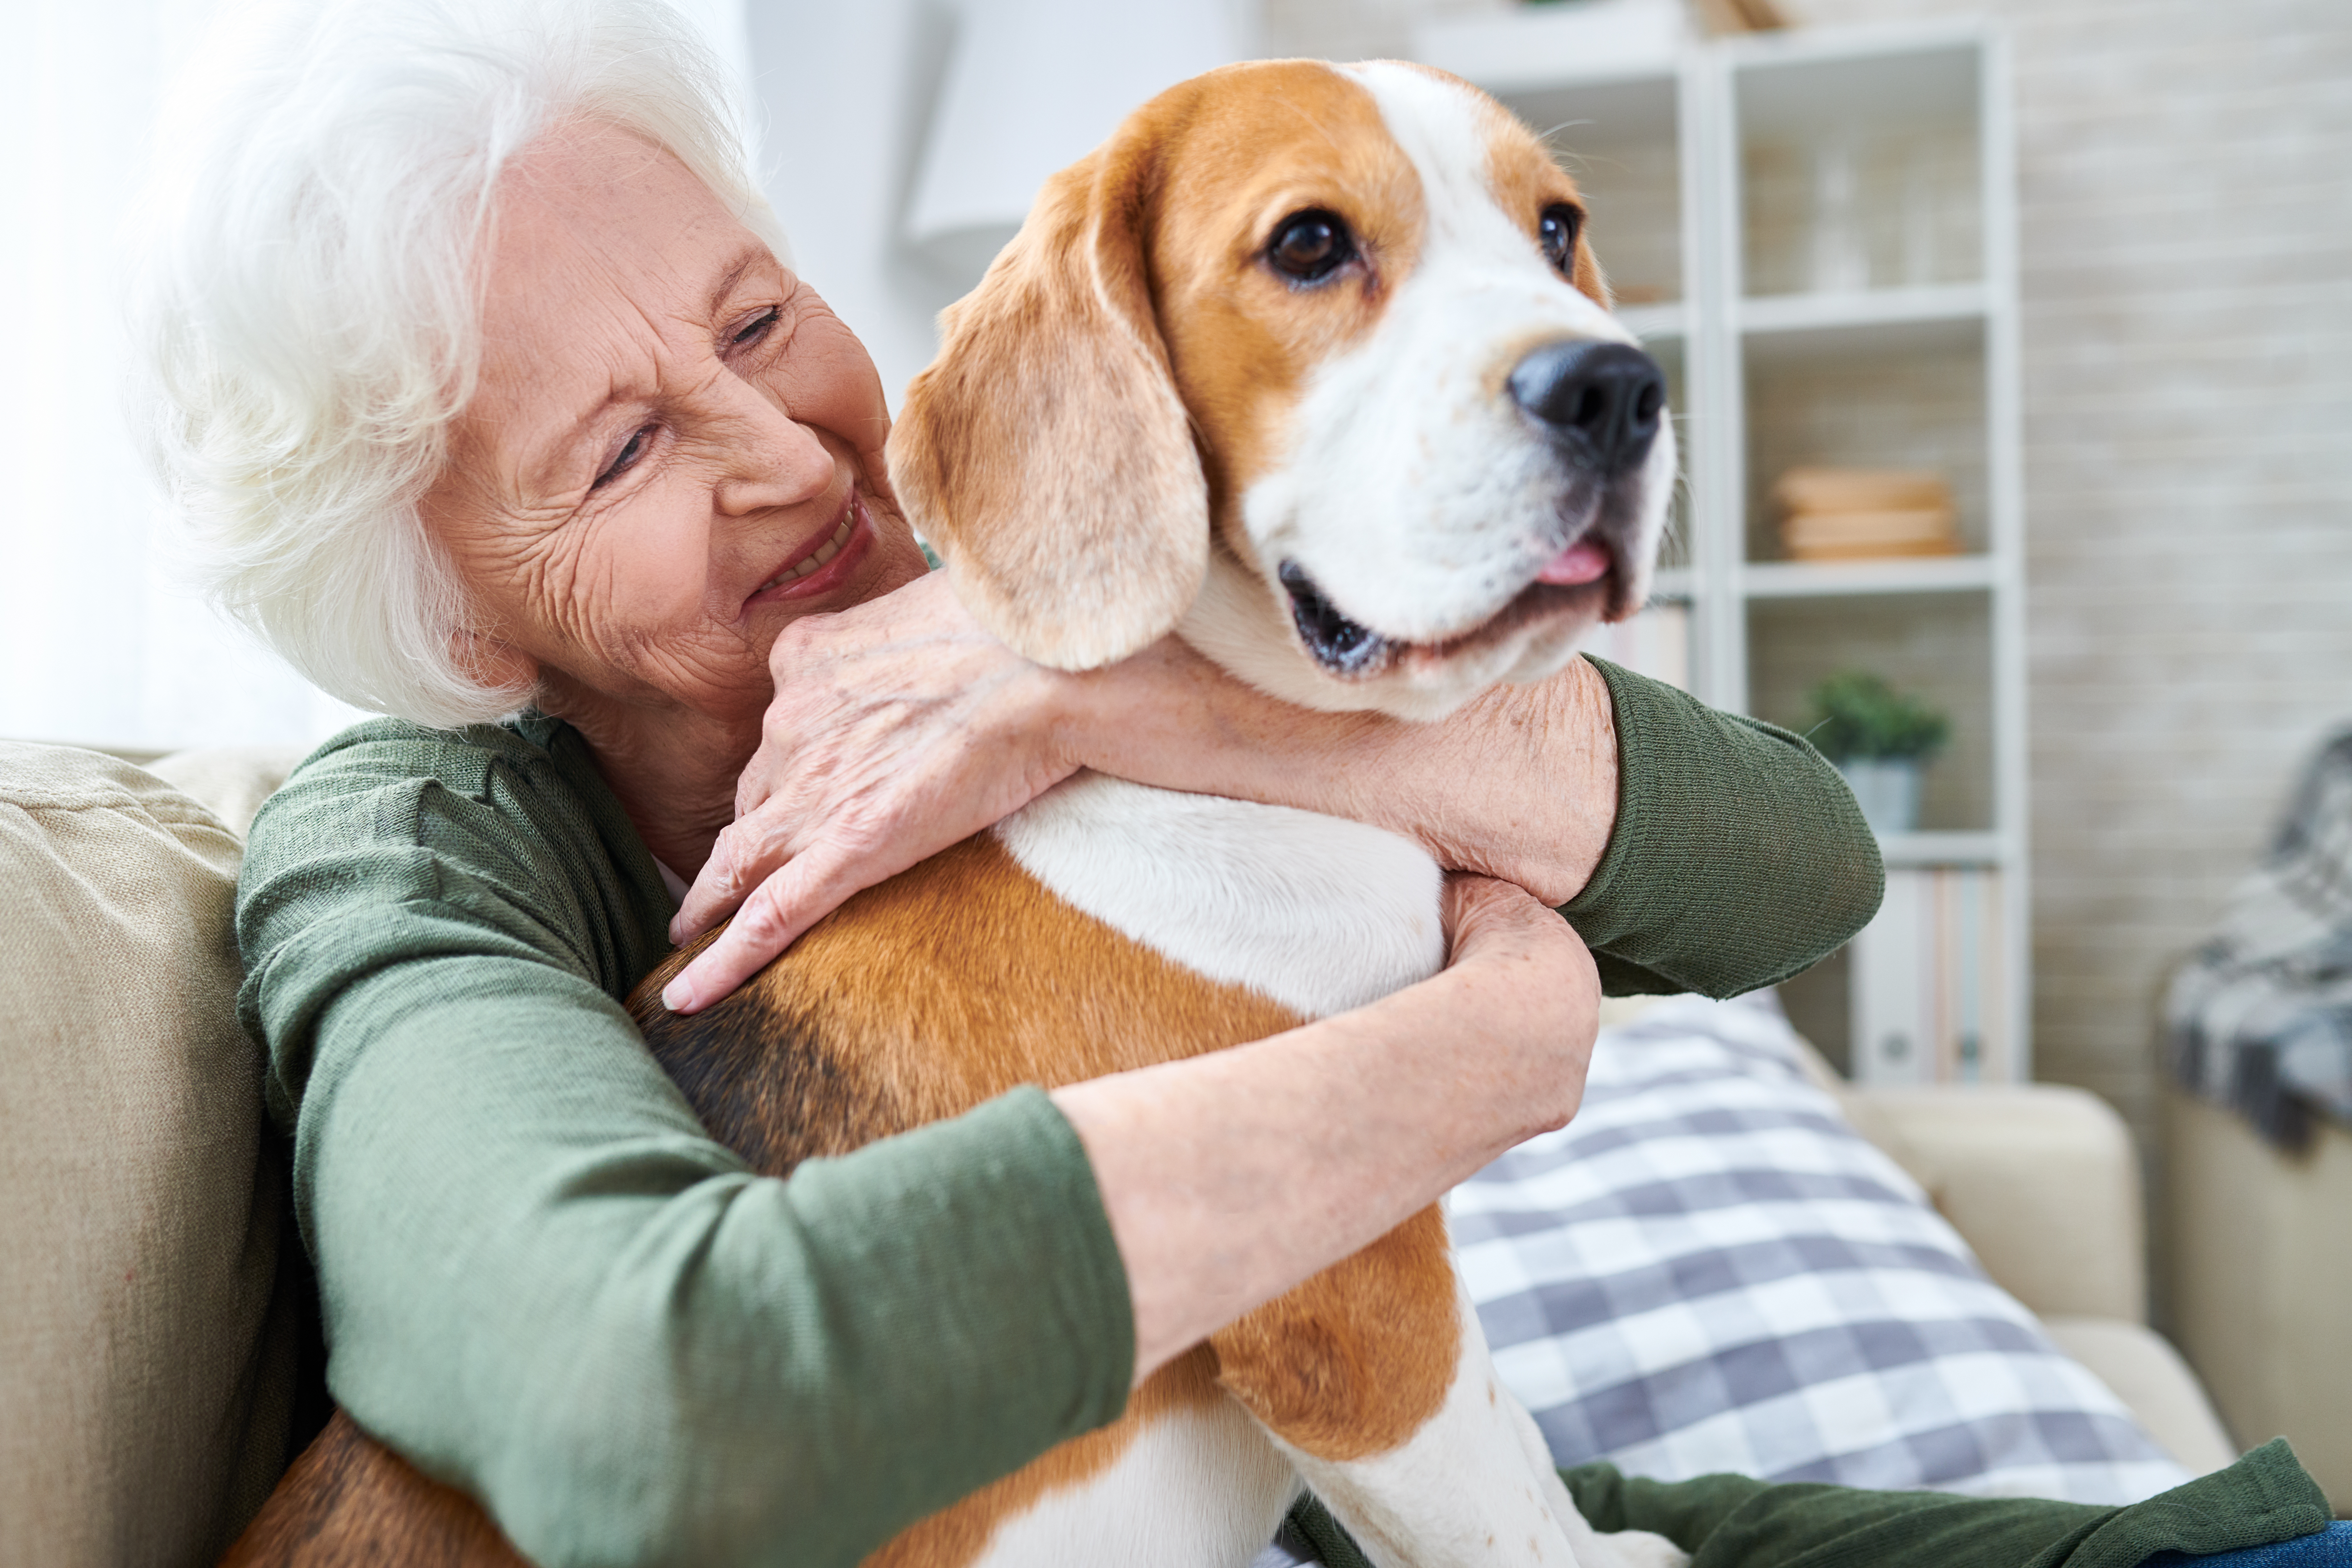 Cheerful retired senior woman with wrinkles smiling while embracing her Beagle dog and enjoying time with pet at home